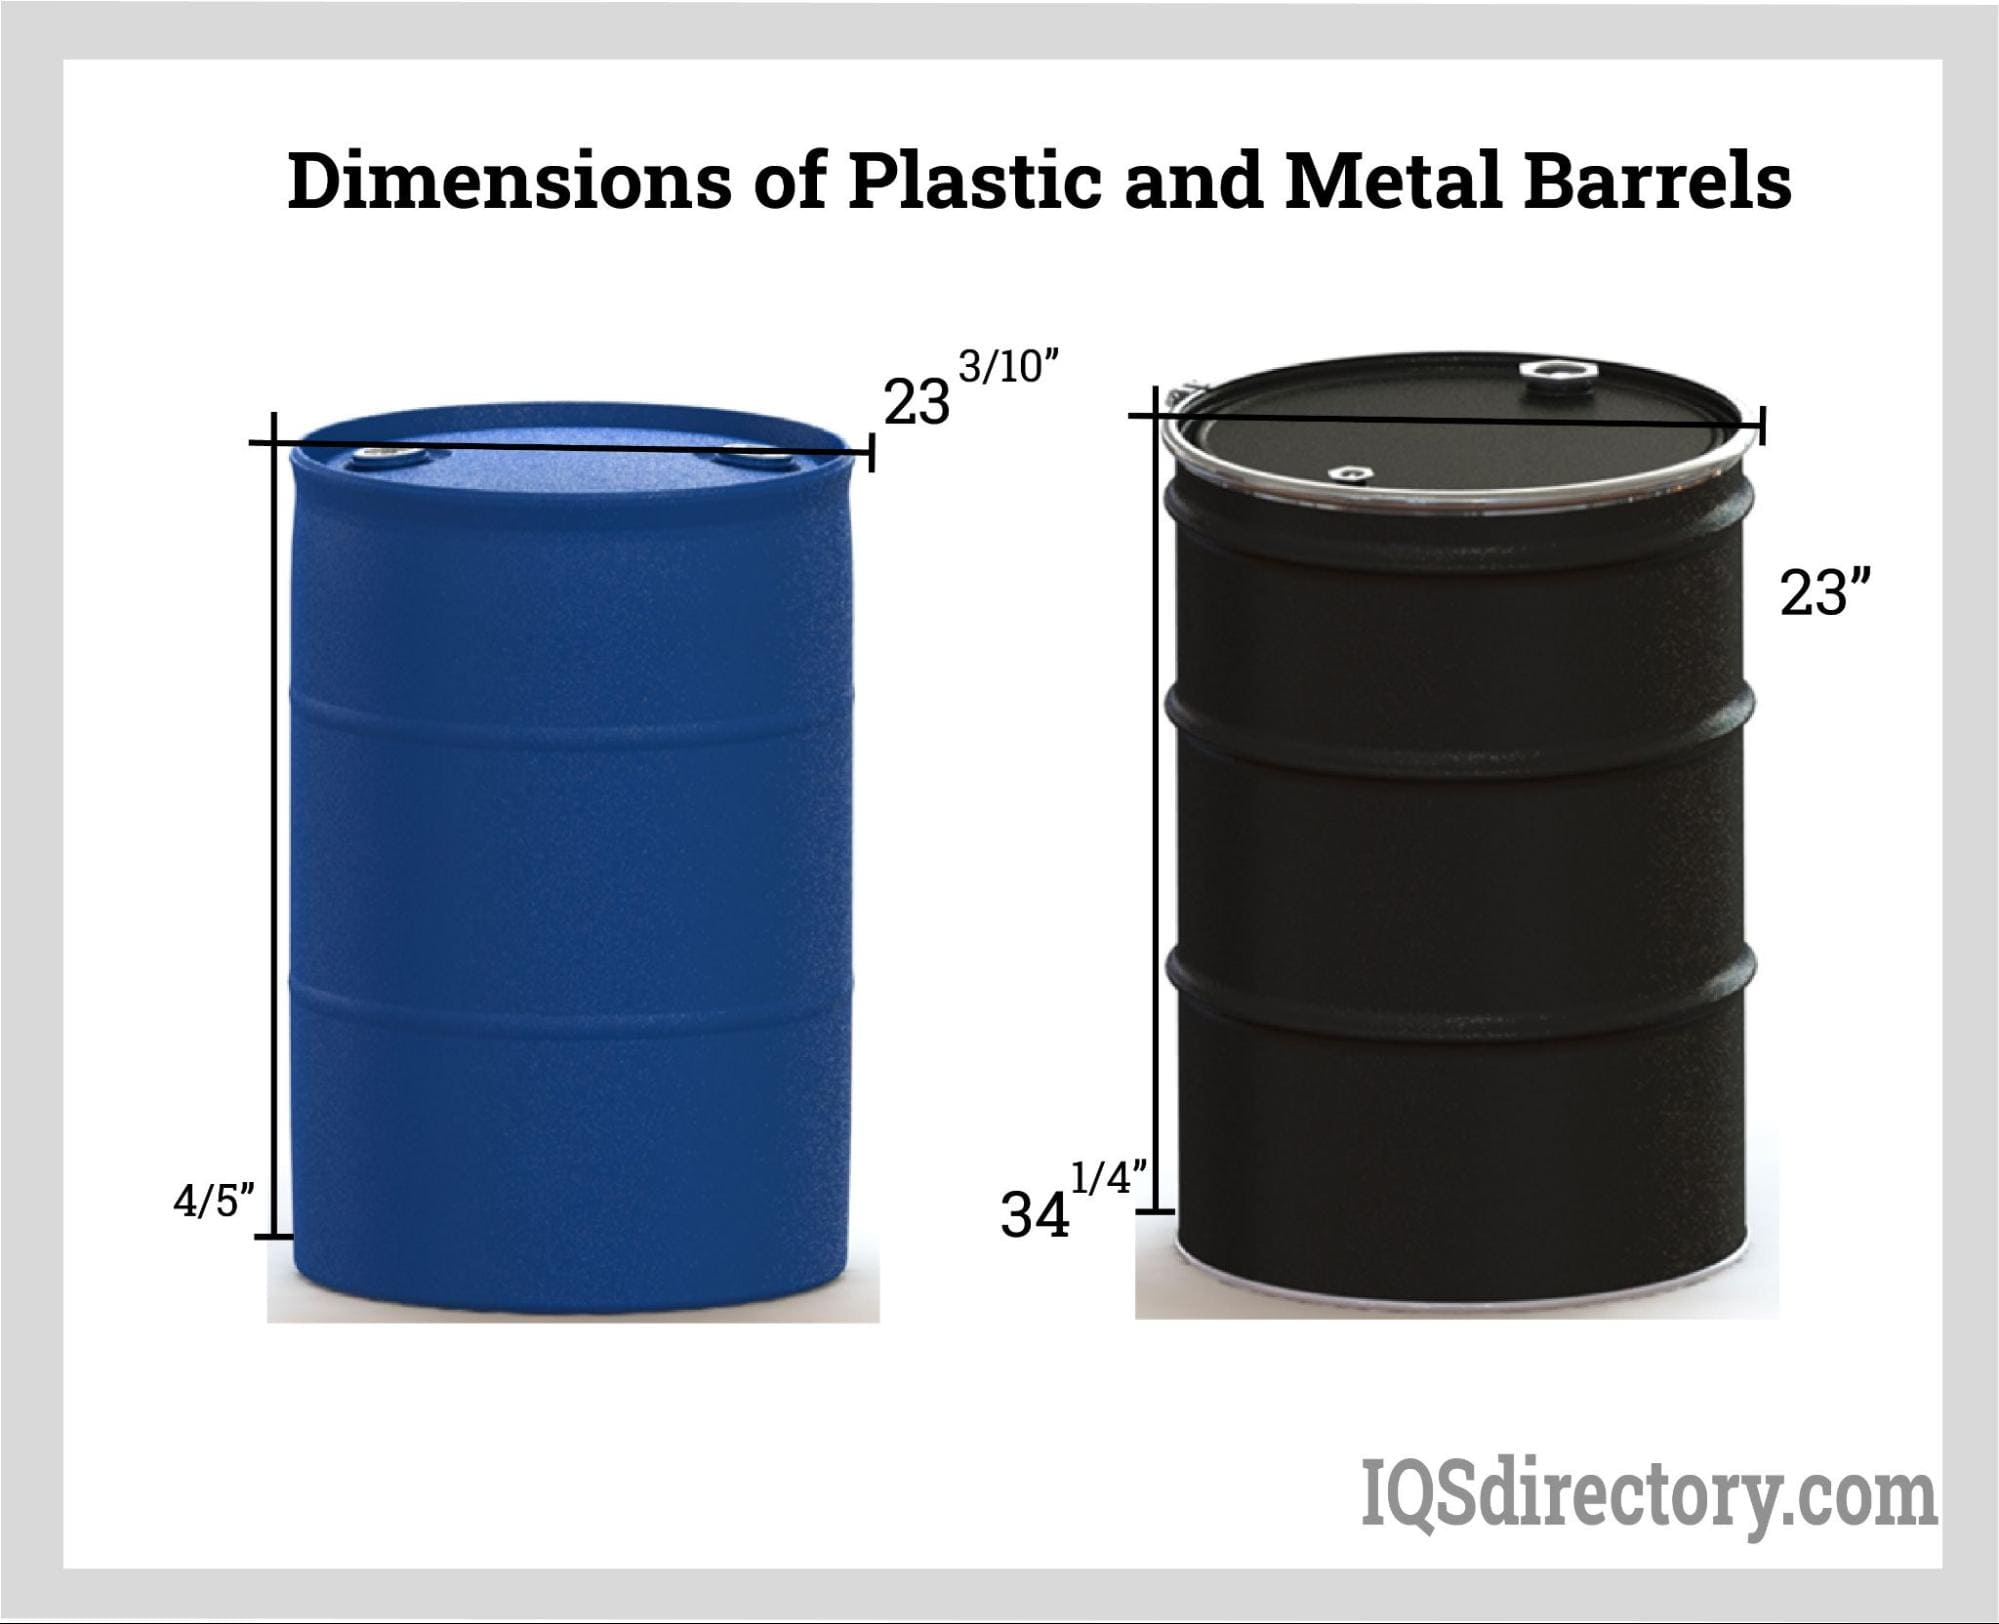 What are the advantages and disadvantages to a metal barrel marker